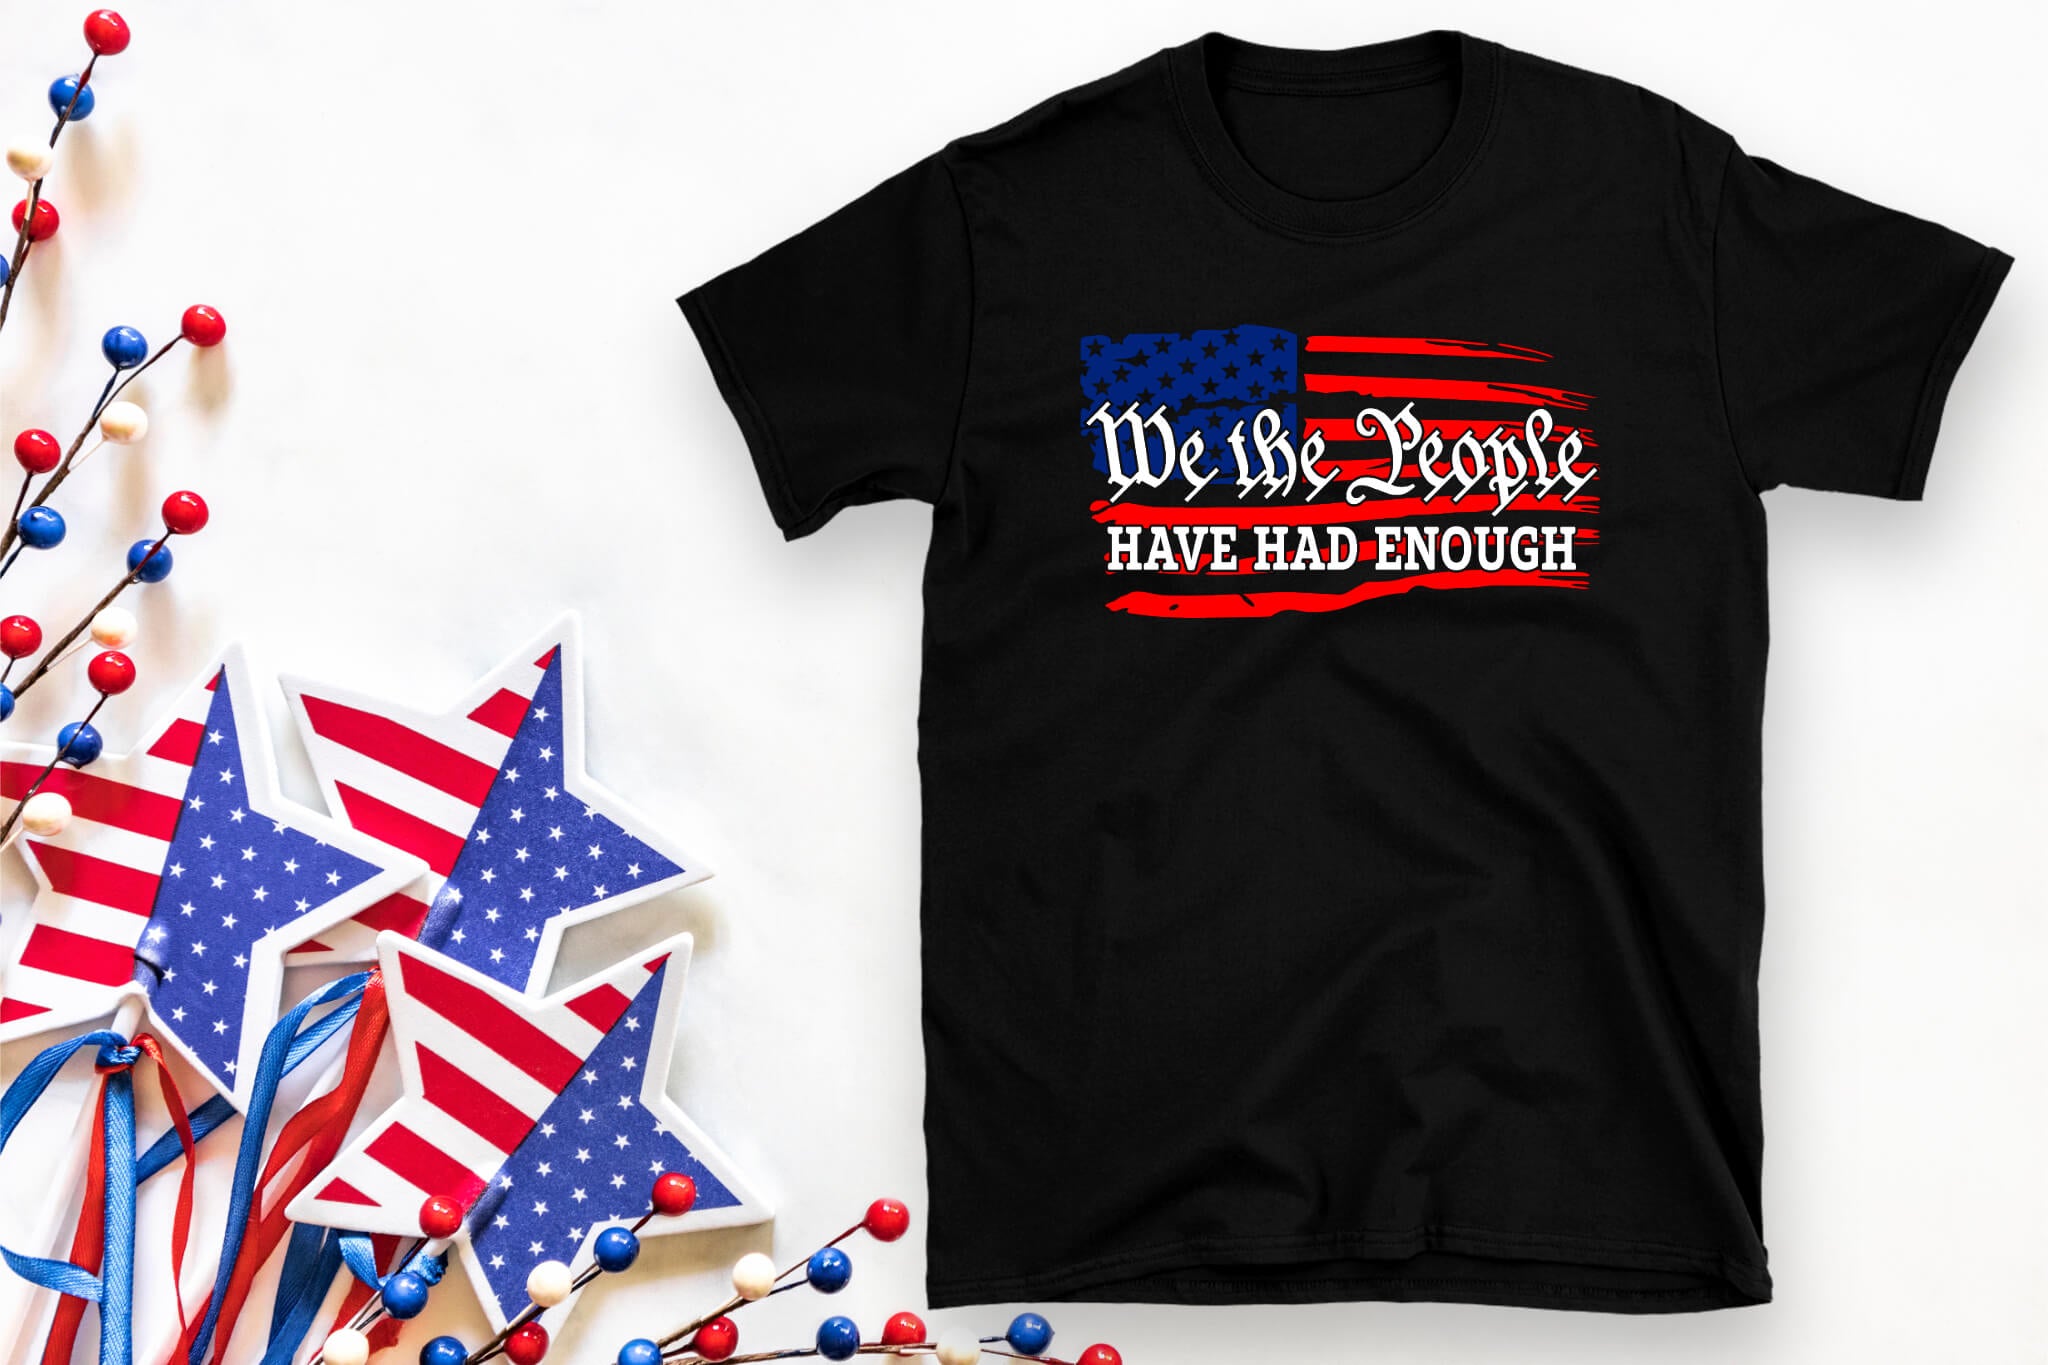 America - We The People Have Had Enough Unisex Graphic Print T-Shirt / Sweatshirt